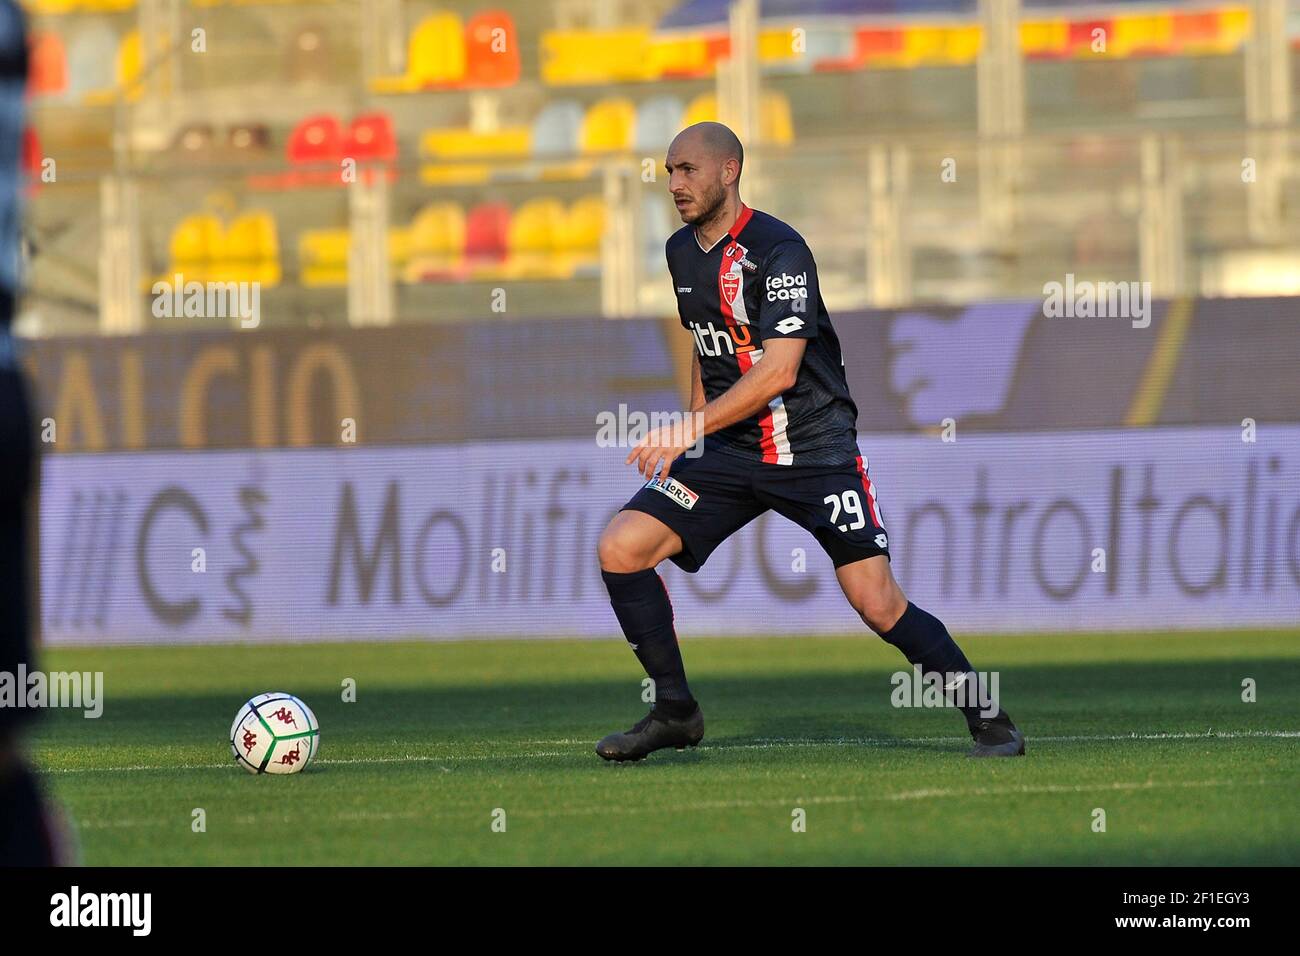 Gabriel Paletta player of Monza, during the match of the Italian Serie B championship, between Frosinon vs Monza, final result 2-2, match played at th Stock Photo